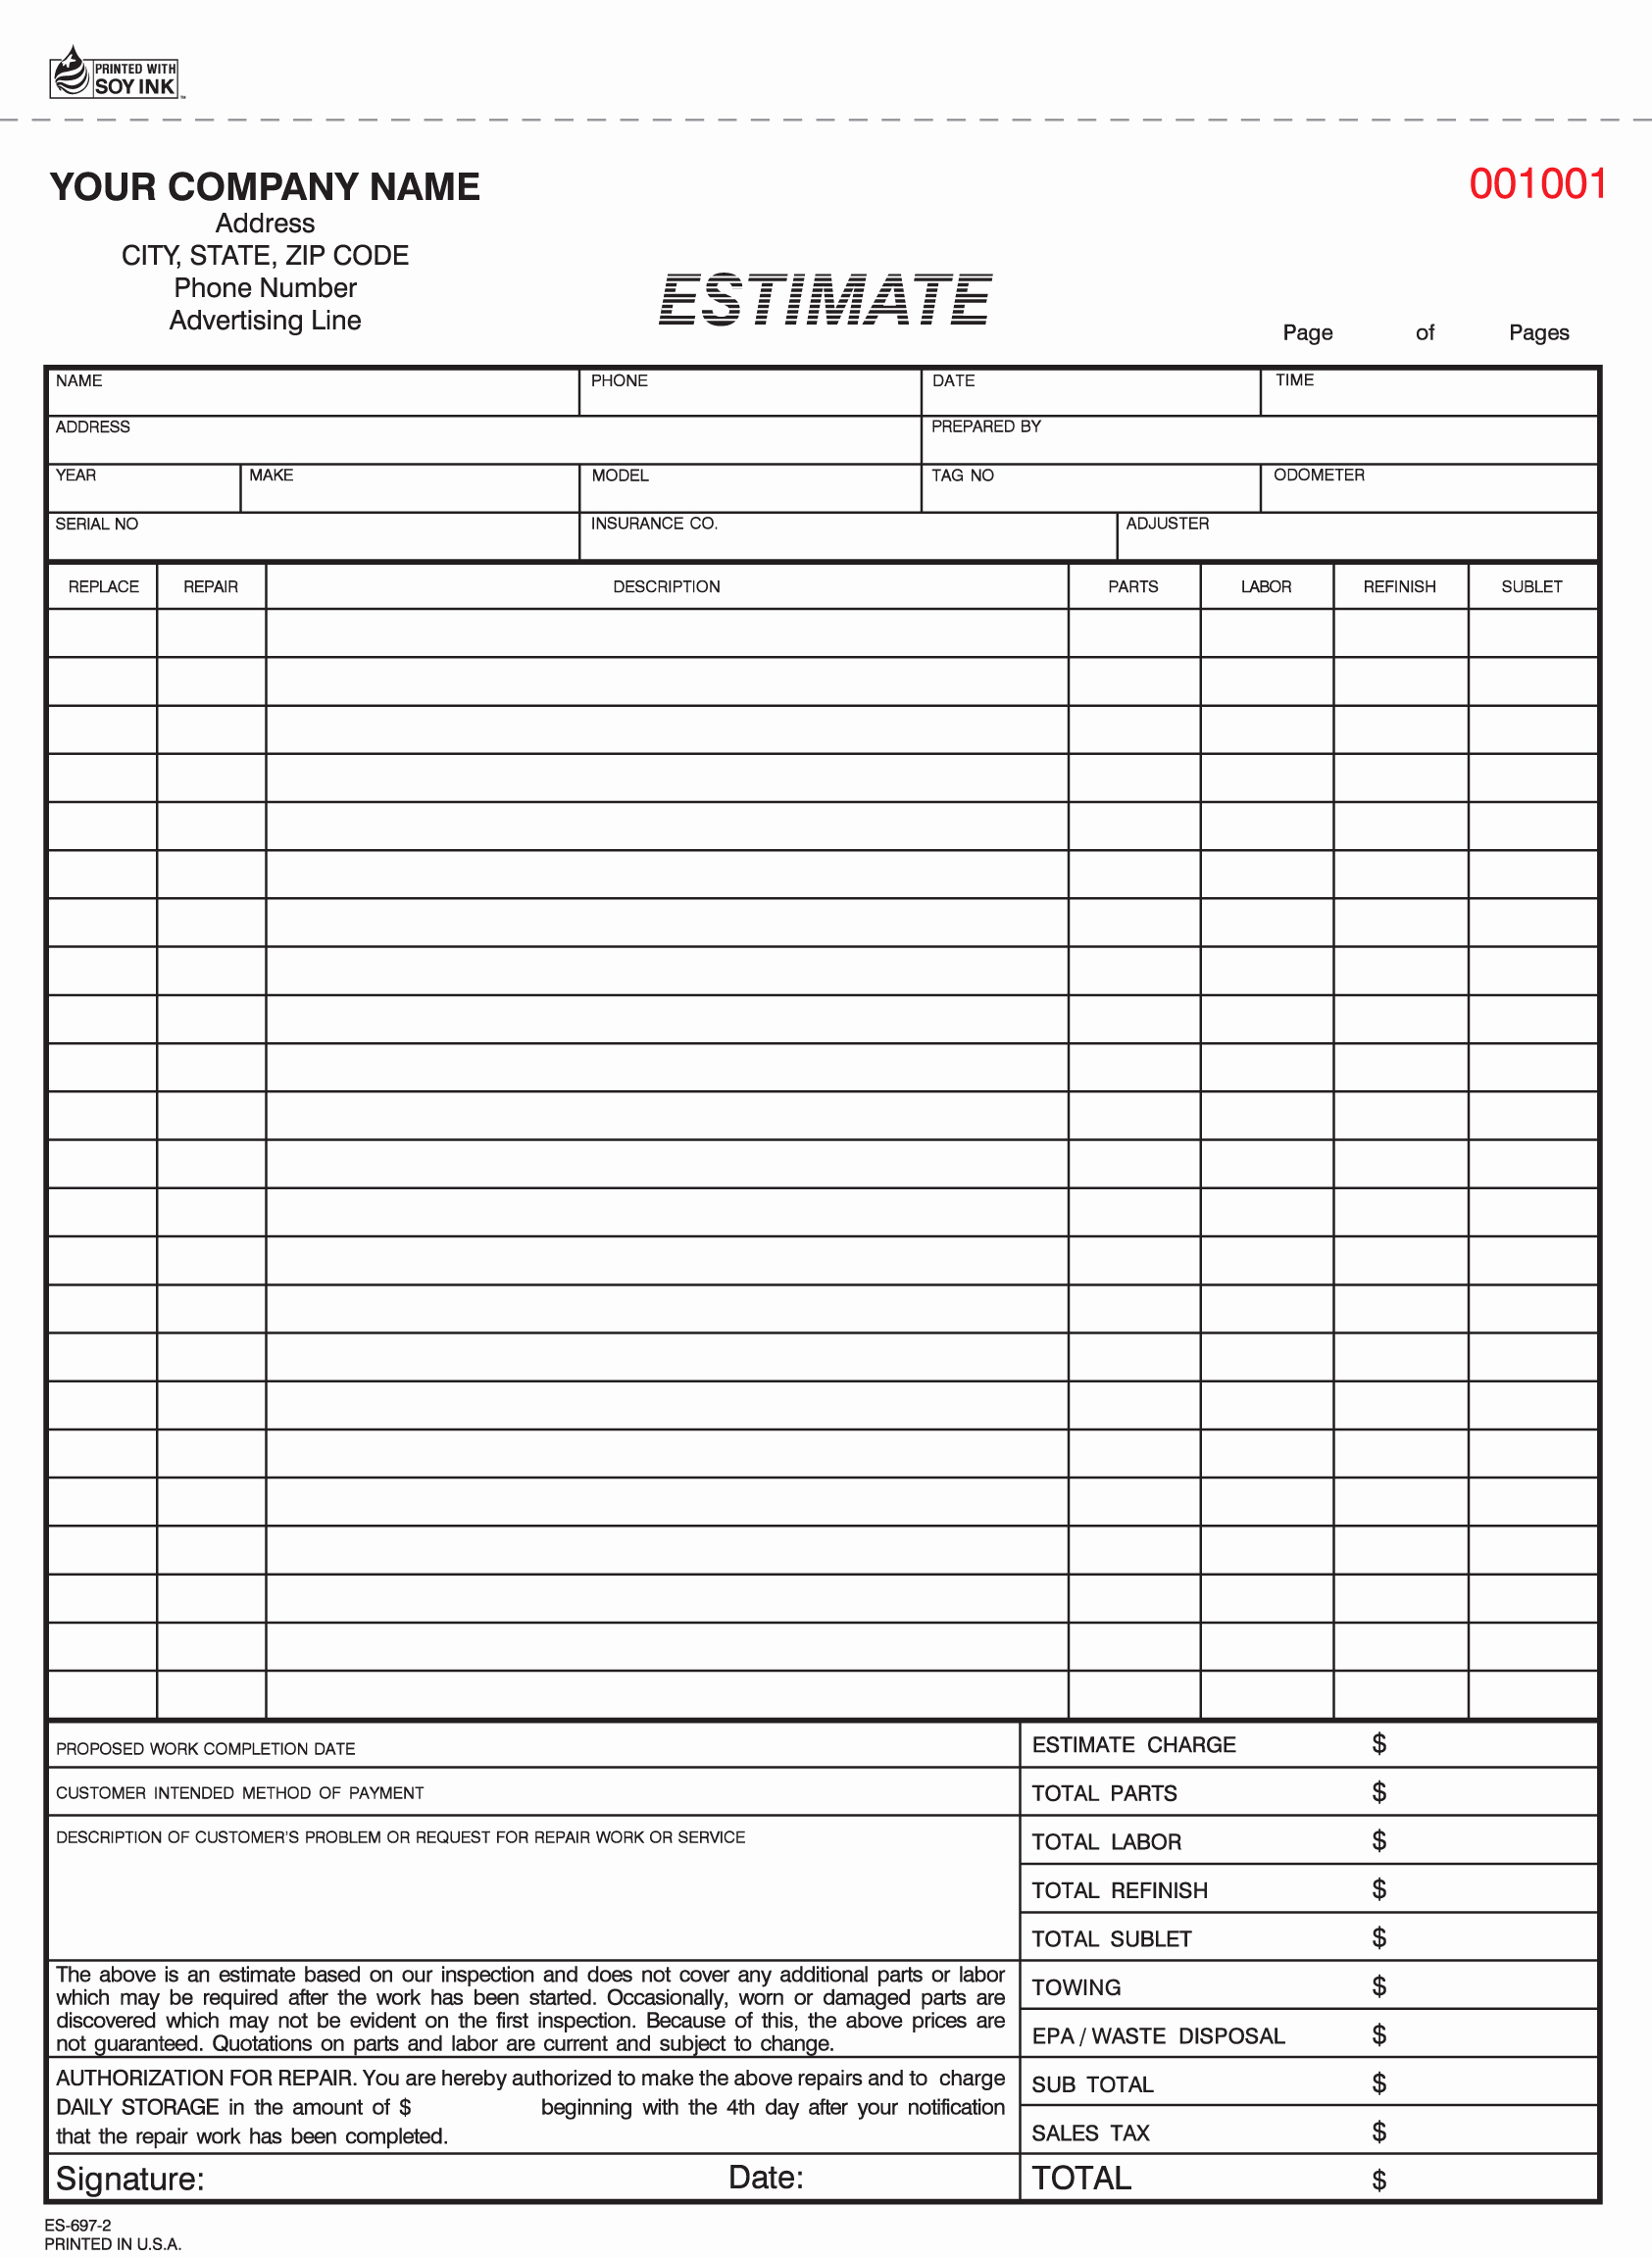 Body Shop Estimate Template Awesome Body Shop Estimate Template Sample Worksheets forms Pdf